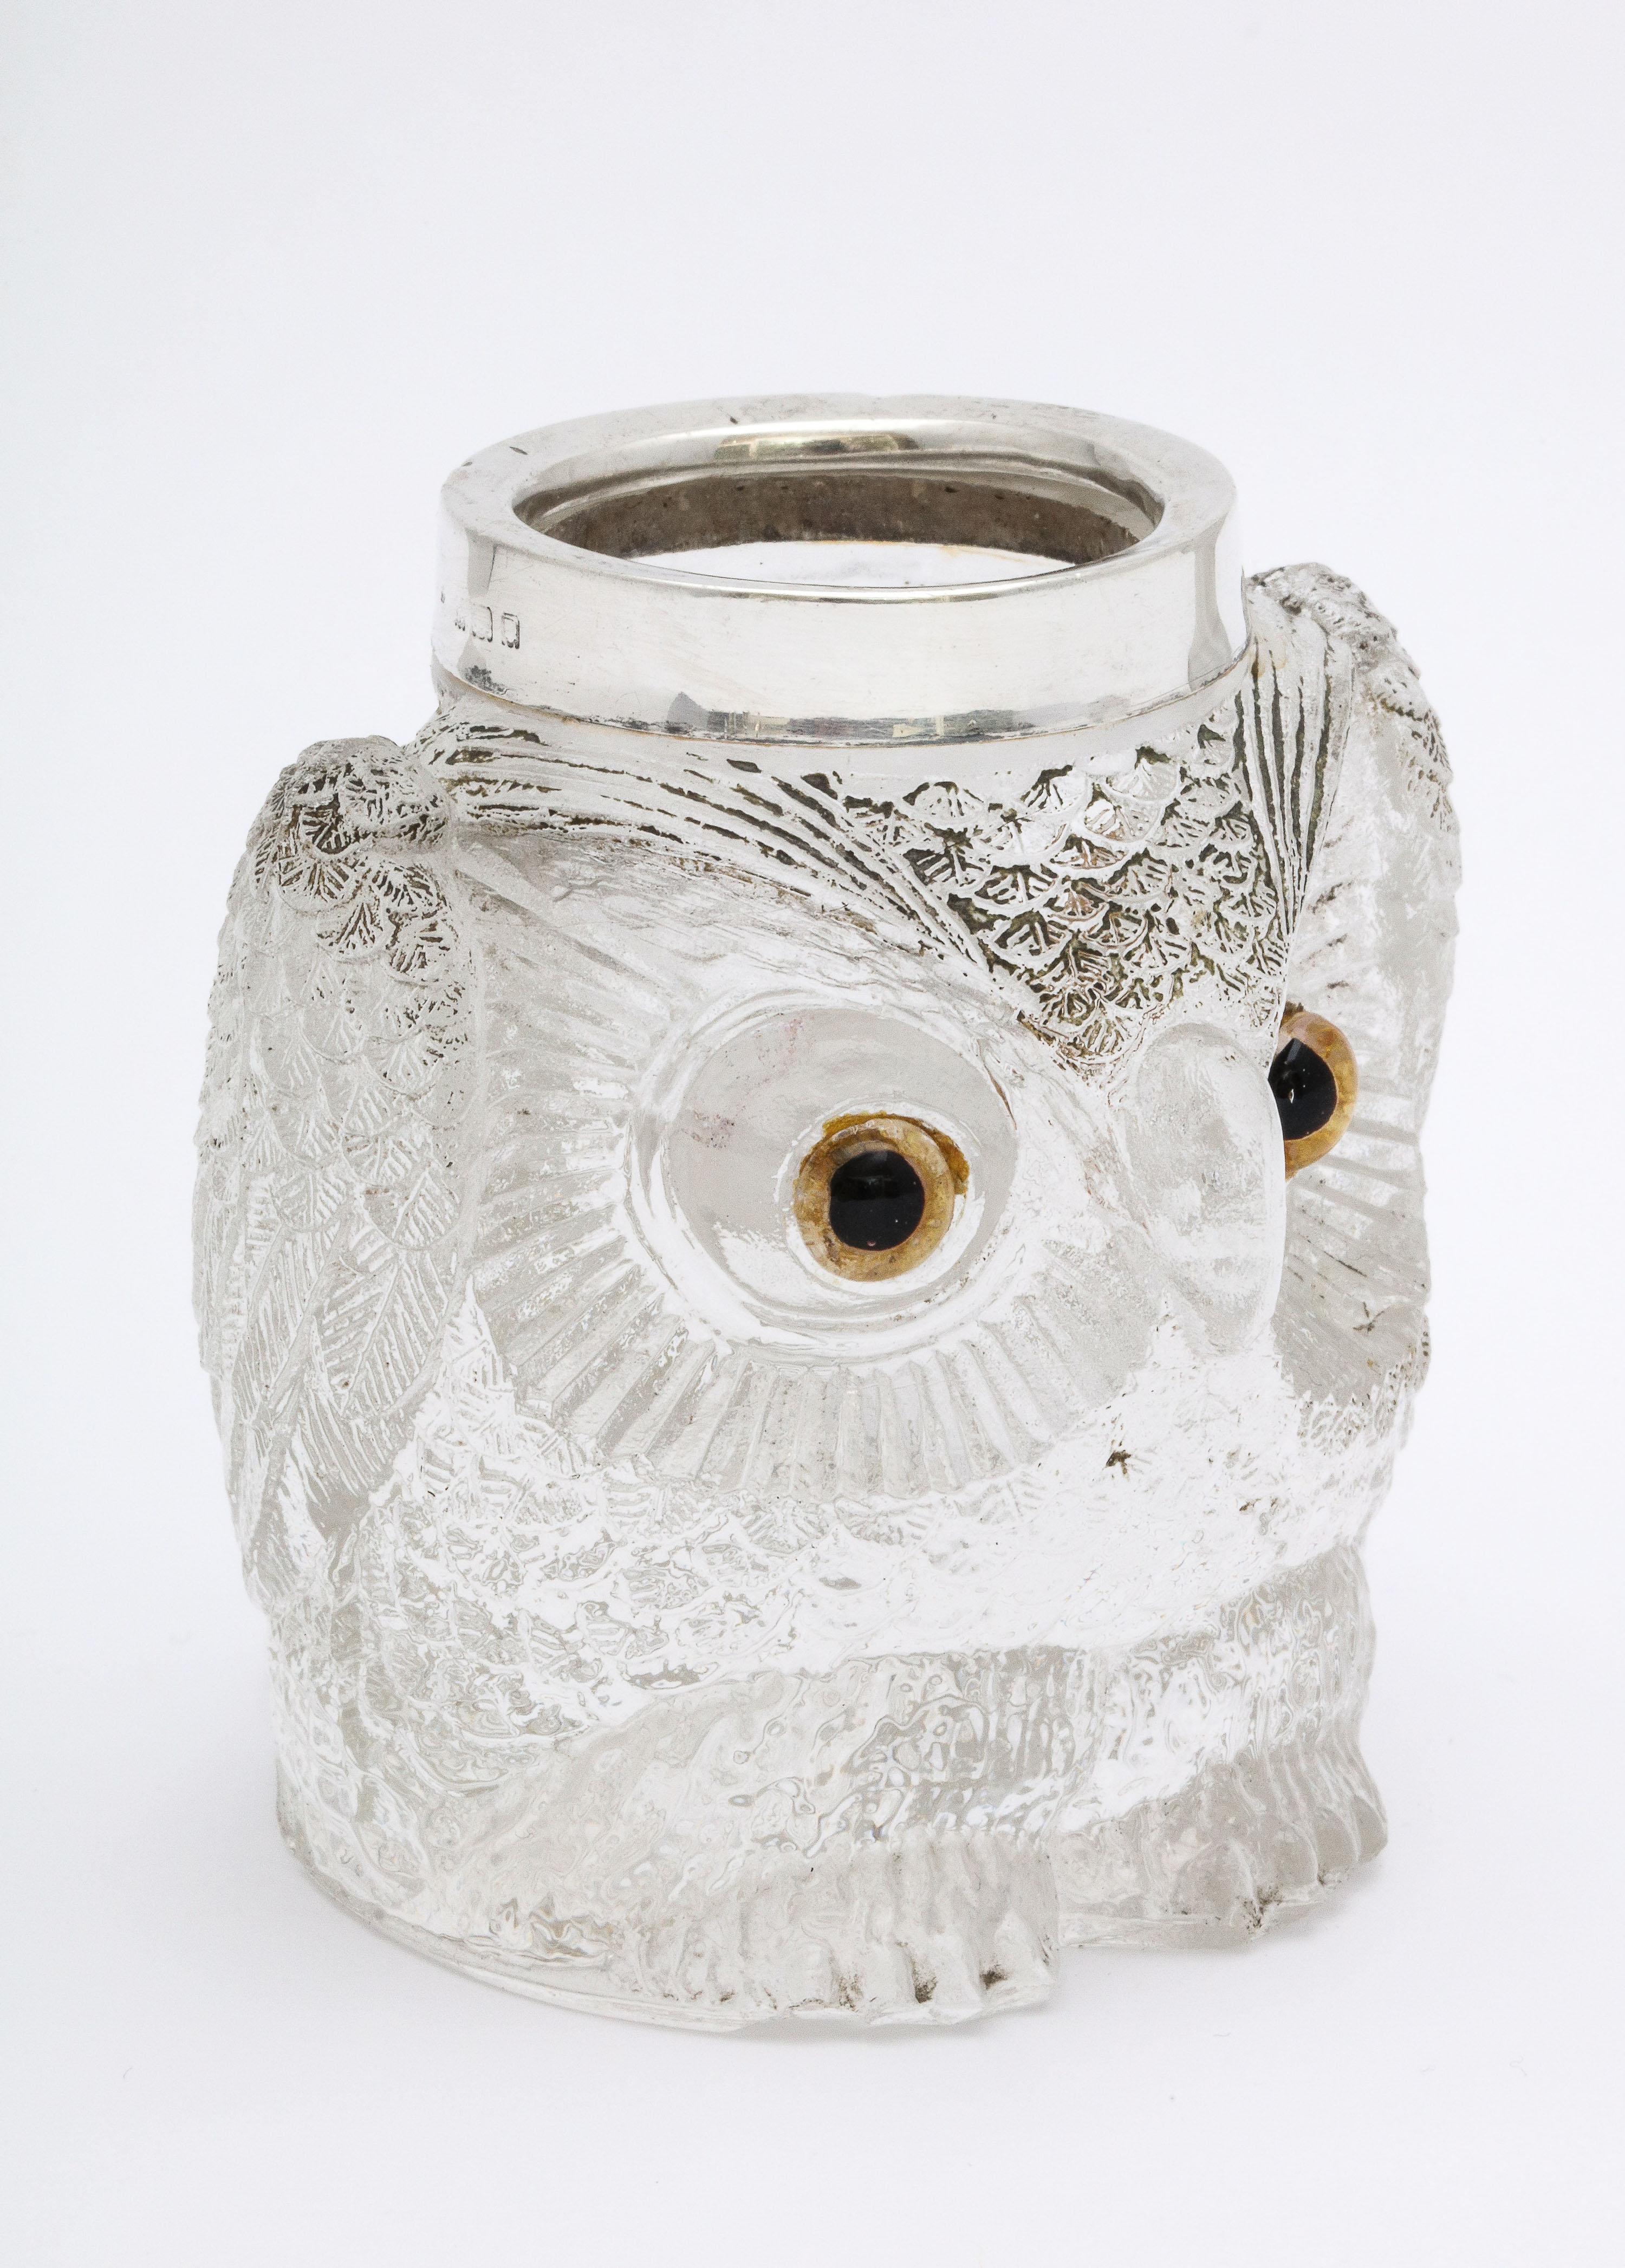 Rare Art Deco Period Sterling Silver-Mounted Glass Owl-Form Match Striker For Sale 1